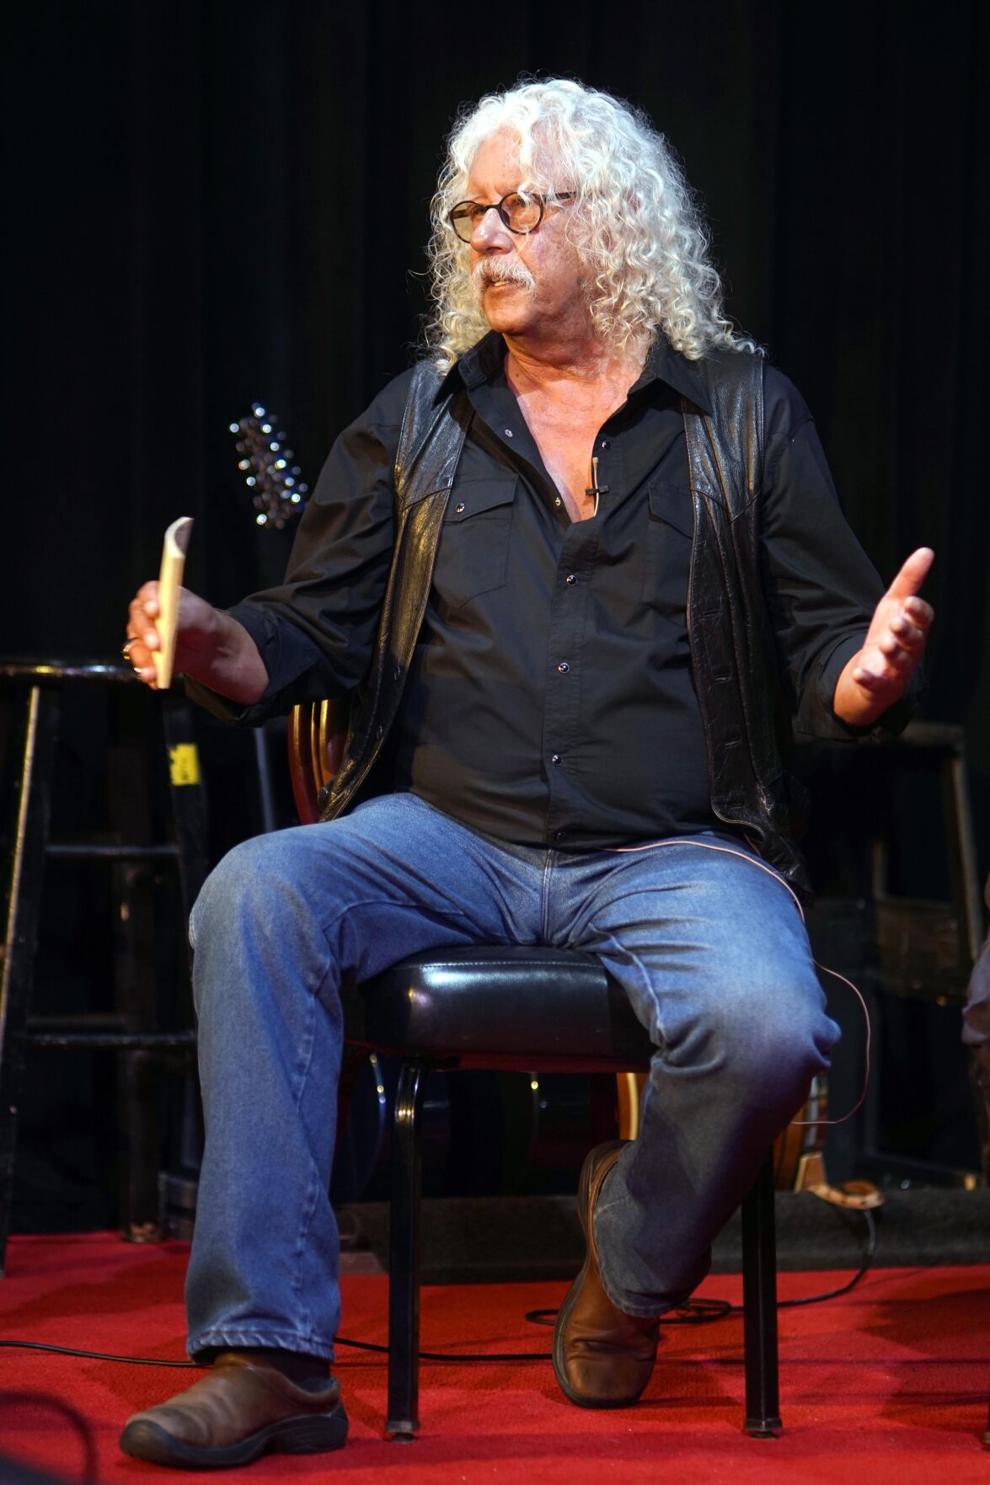 What to expect from Arlo Guthrie's return to the stage in 2023? A man